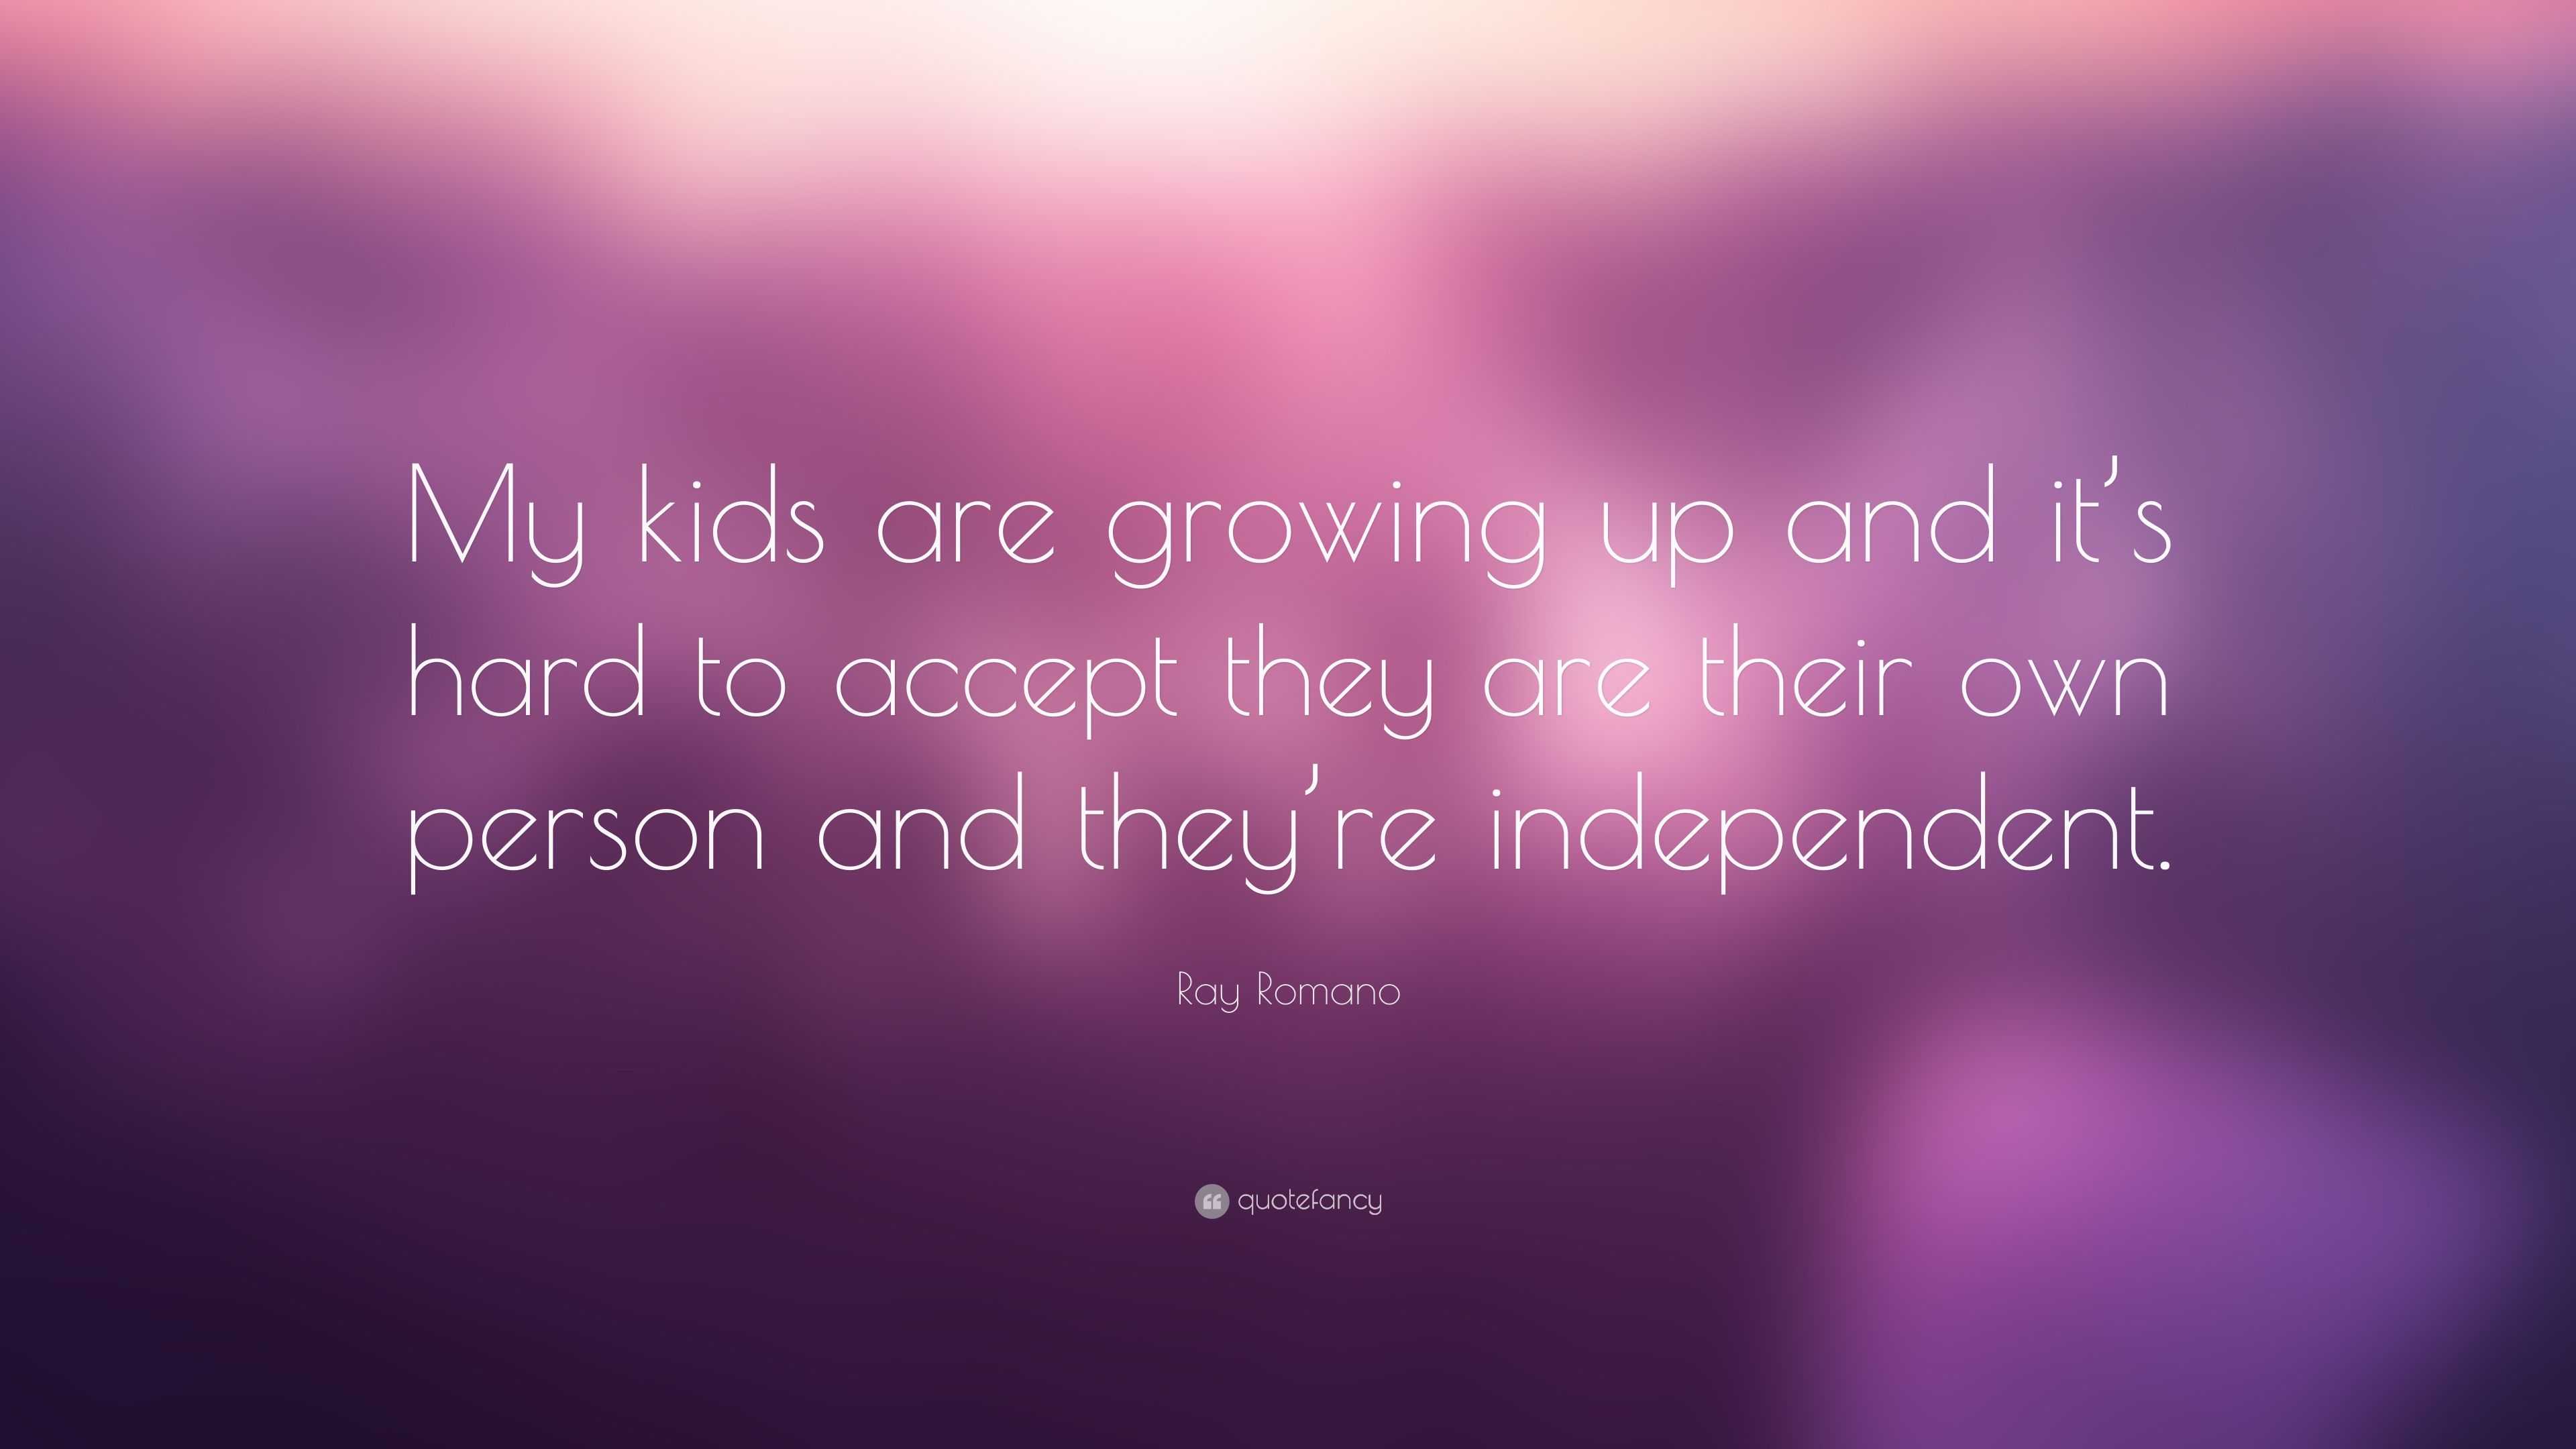 Ray Romano Quote “My kids are growing up and it's hard to accept ...